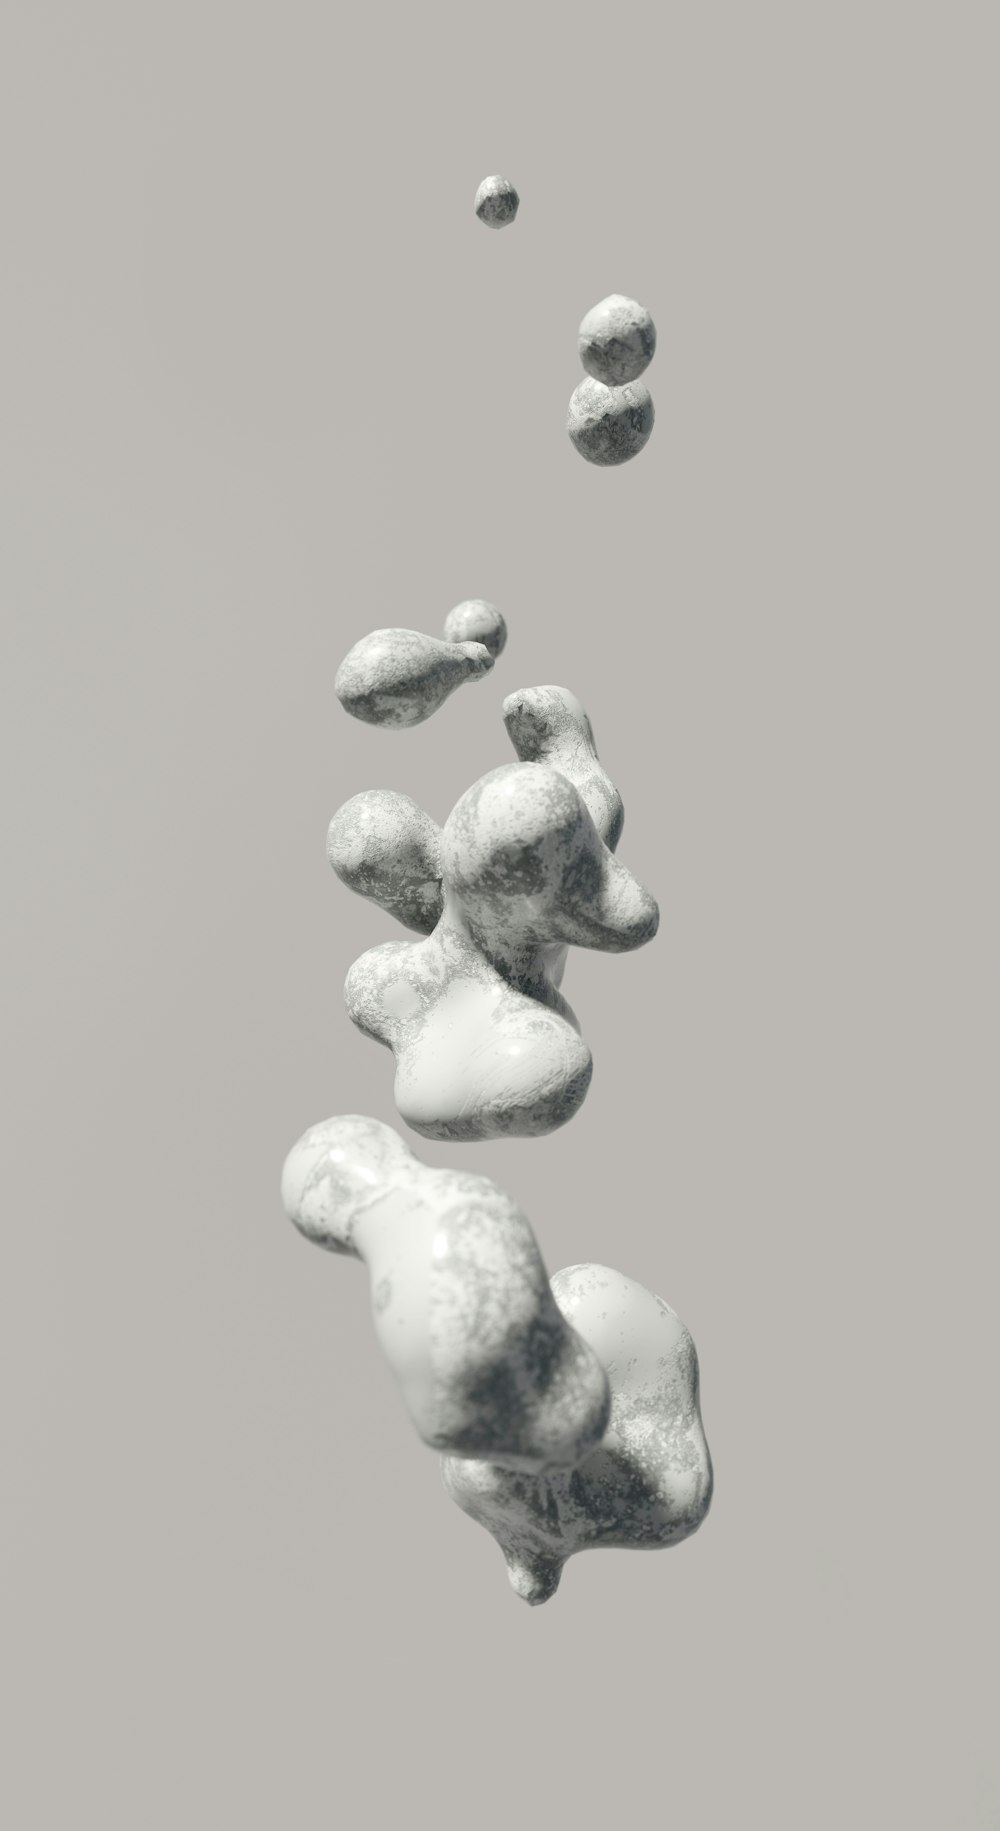 a group of rocks floating in the air